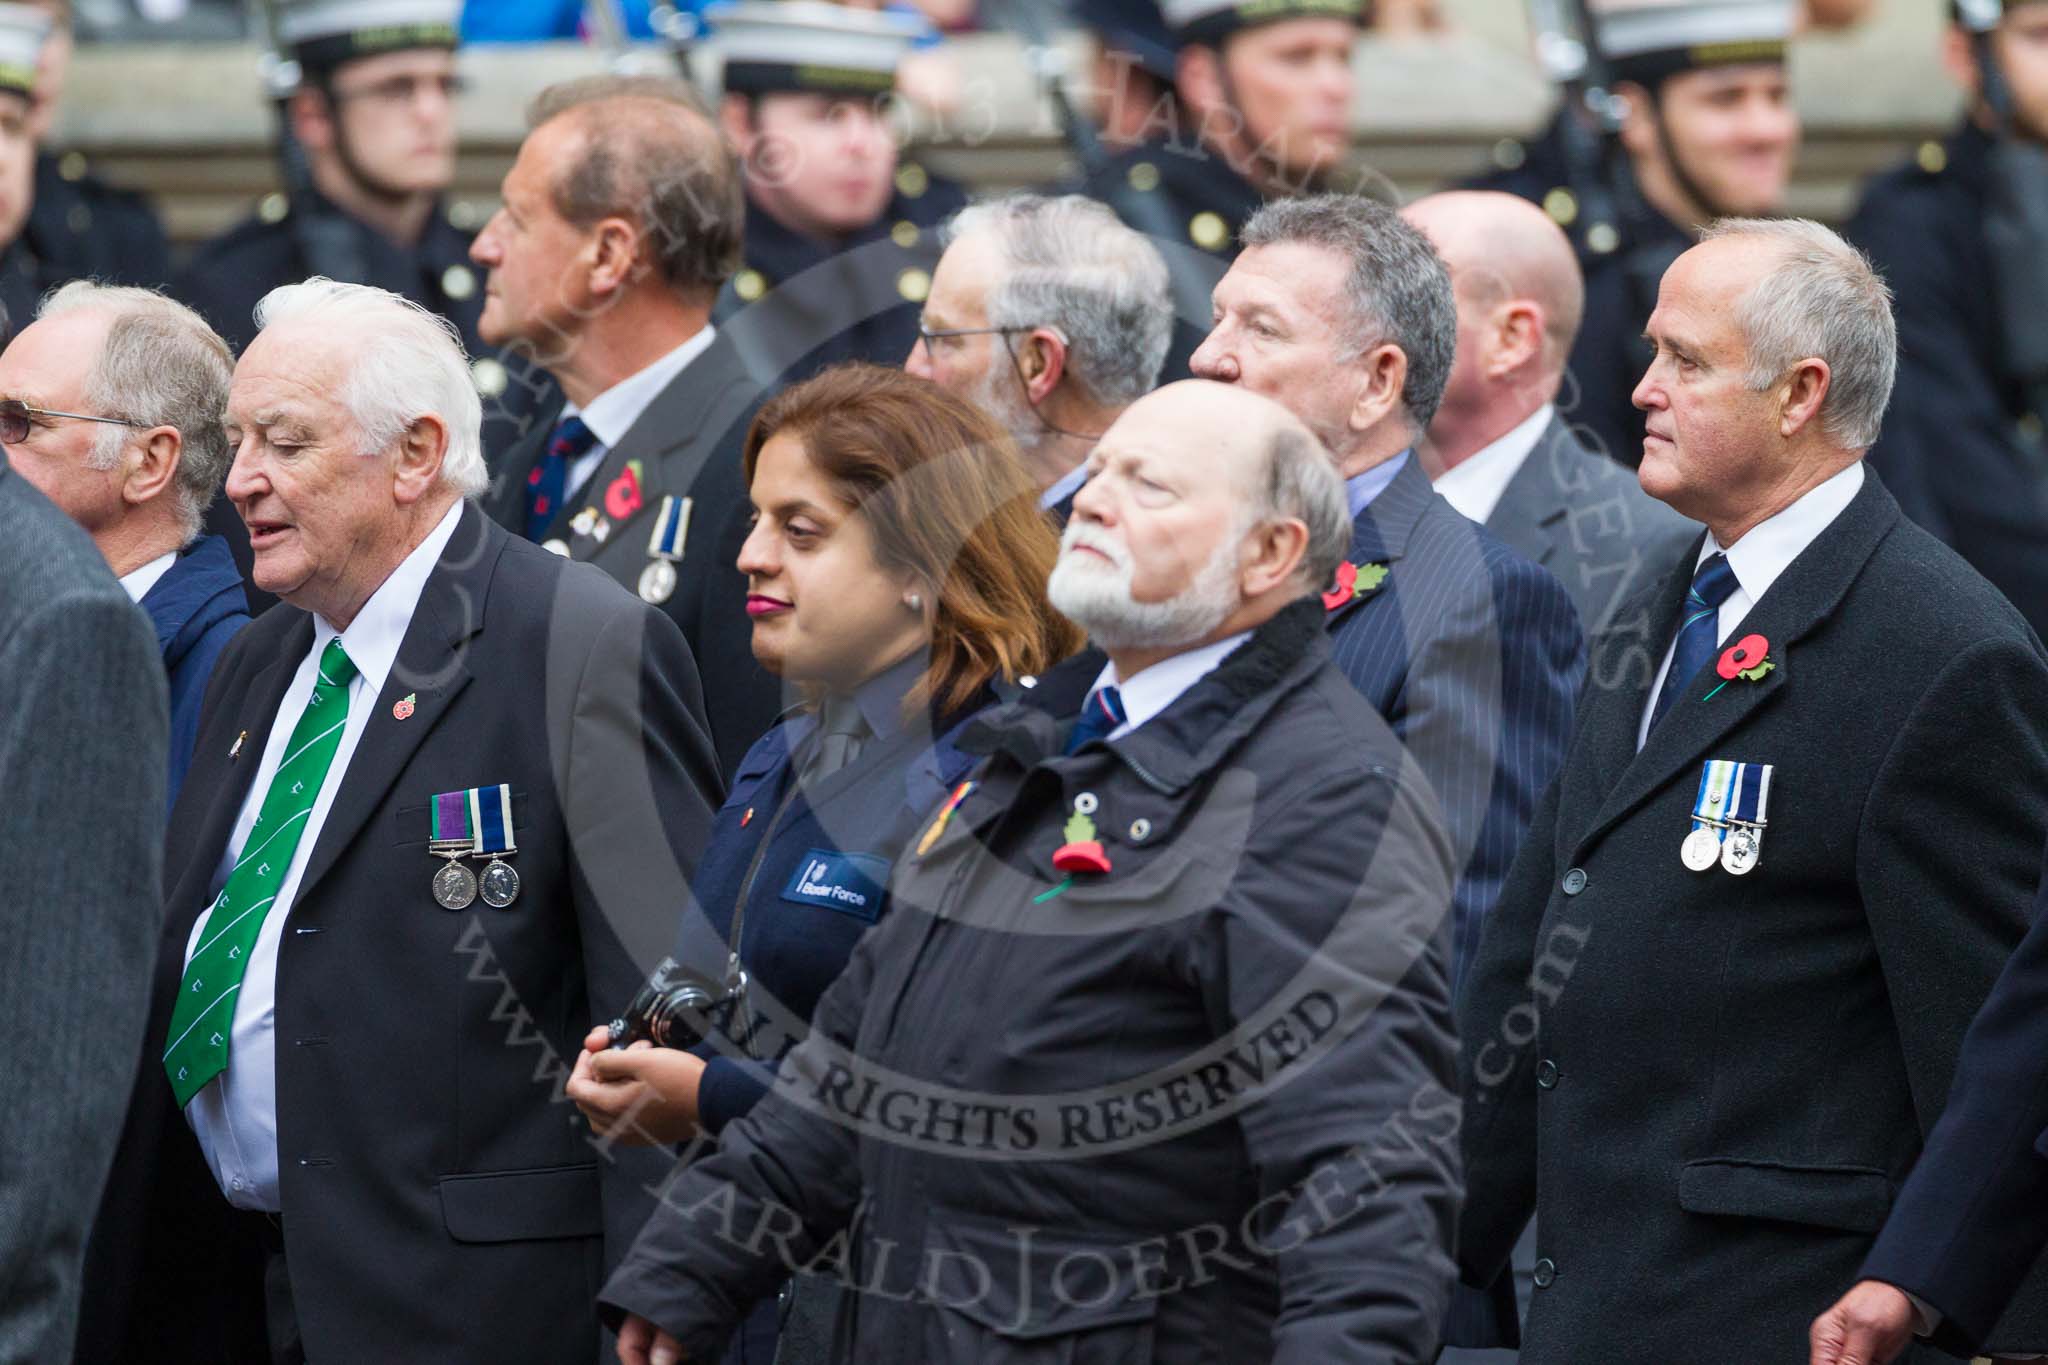 Remembrance Sunday at the Cenotaph 2015: Group E31, The Fisgard Association.
Cenotaph, Whitehall, London SW1,
London,
Greater London,
United Kingdom,
on 08 November 2015 at 12:03, image #968